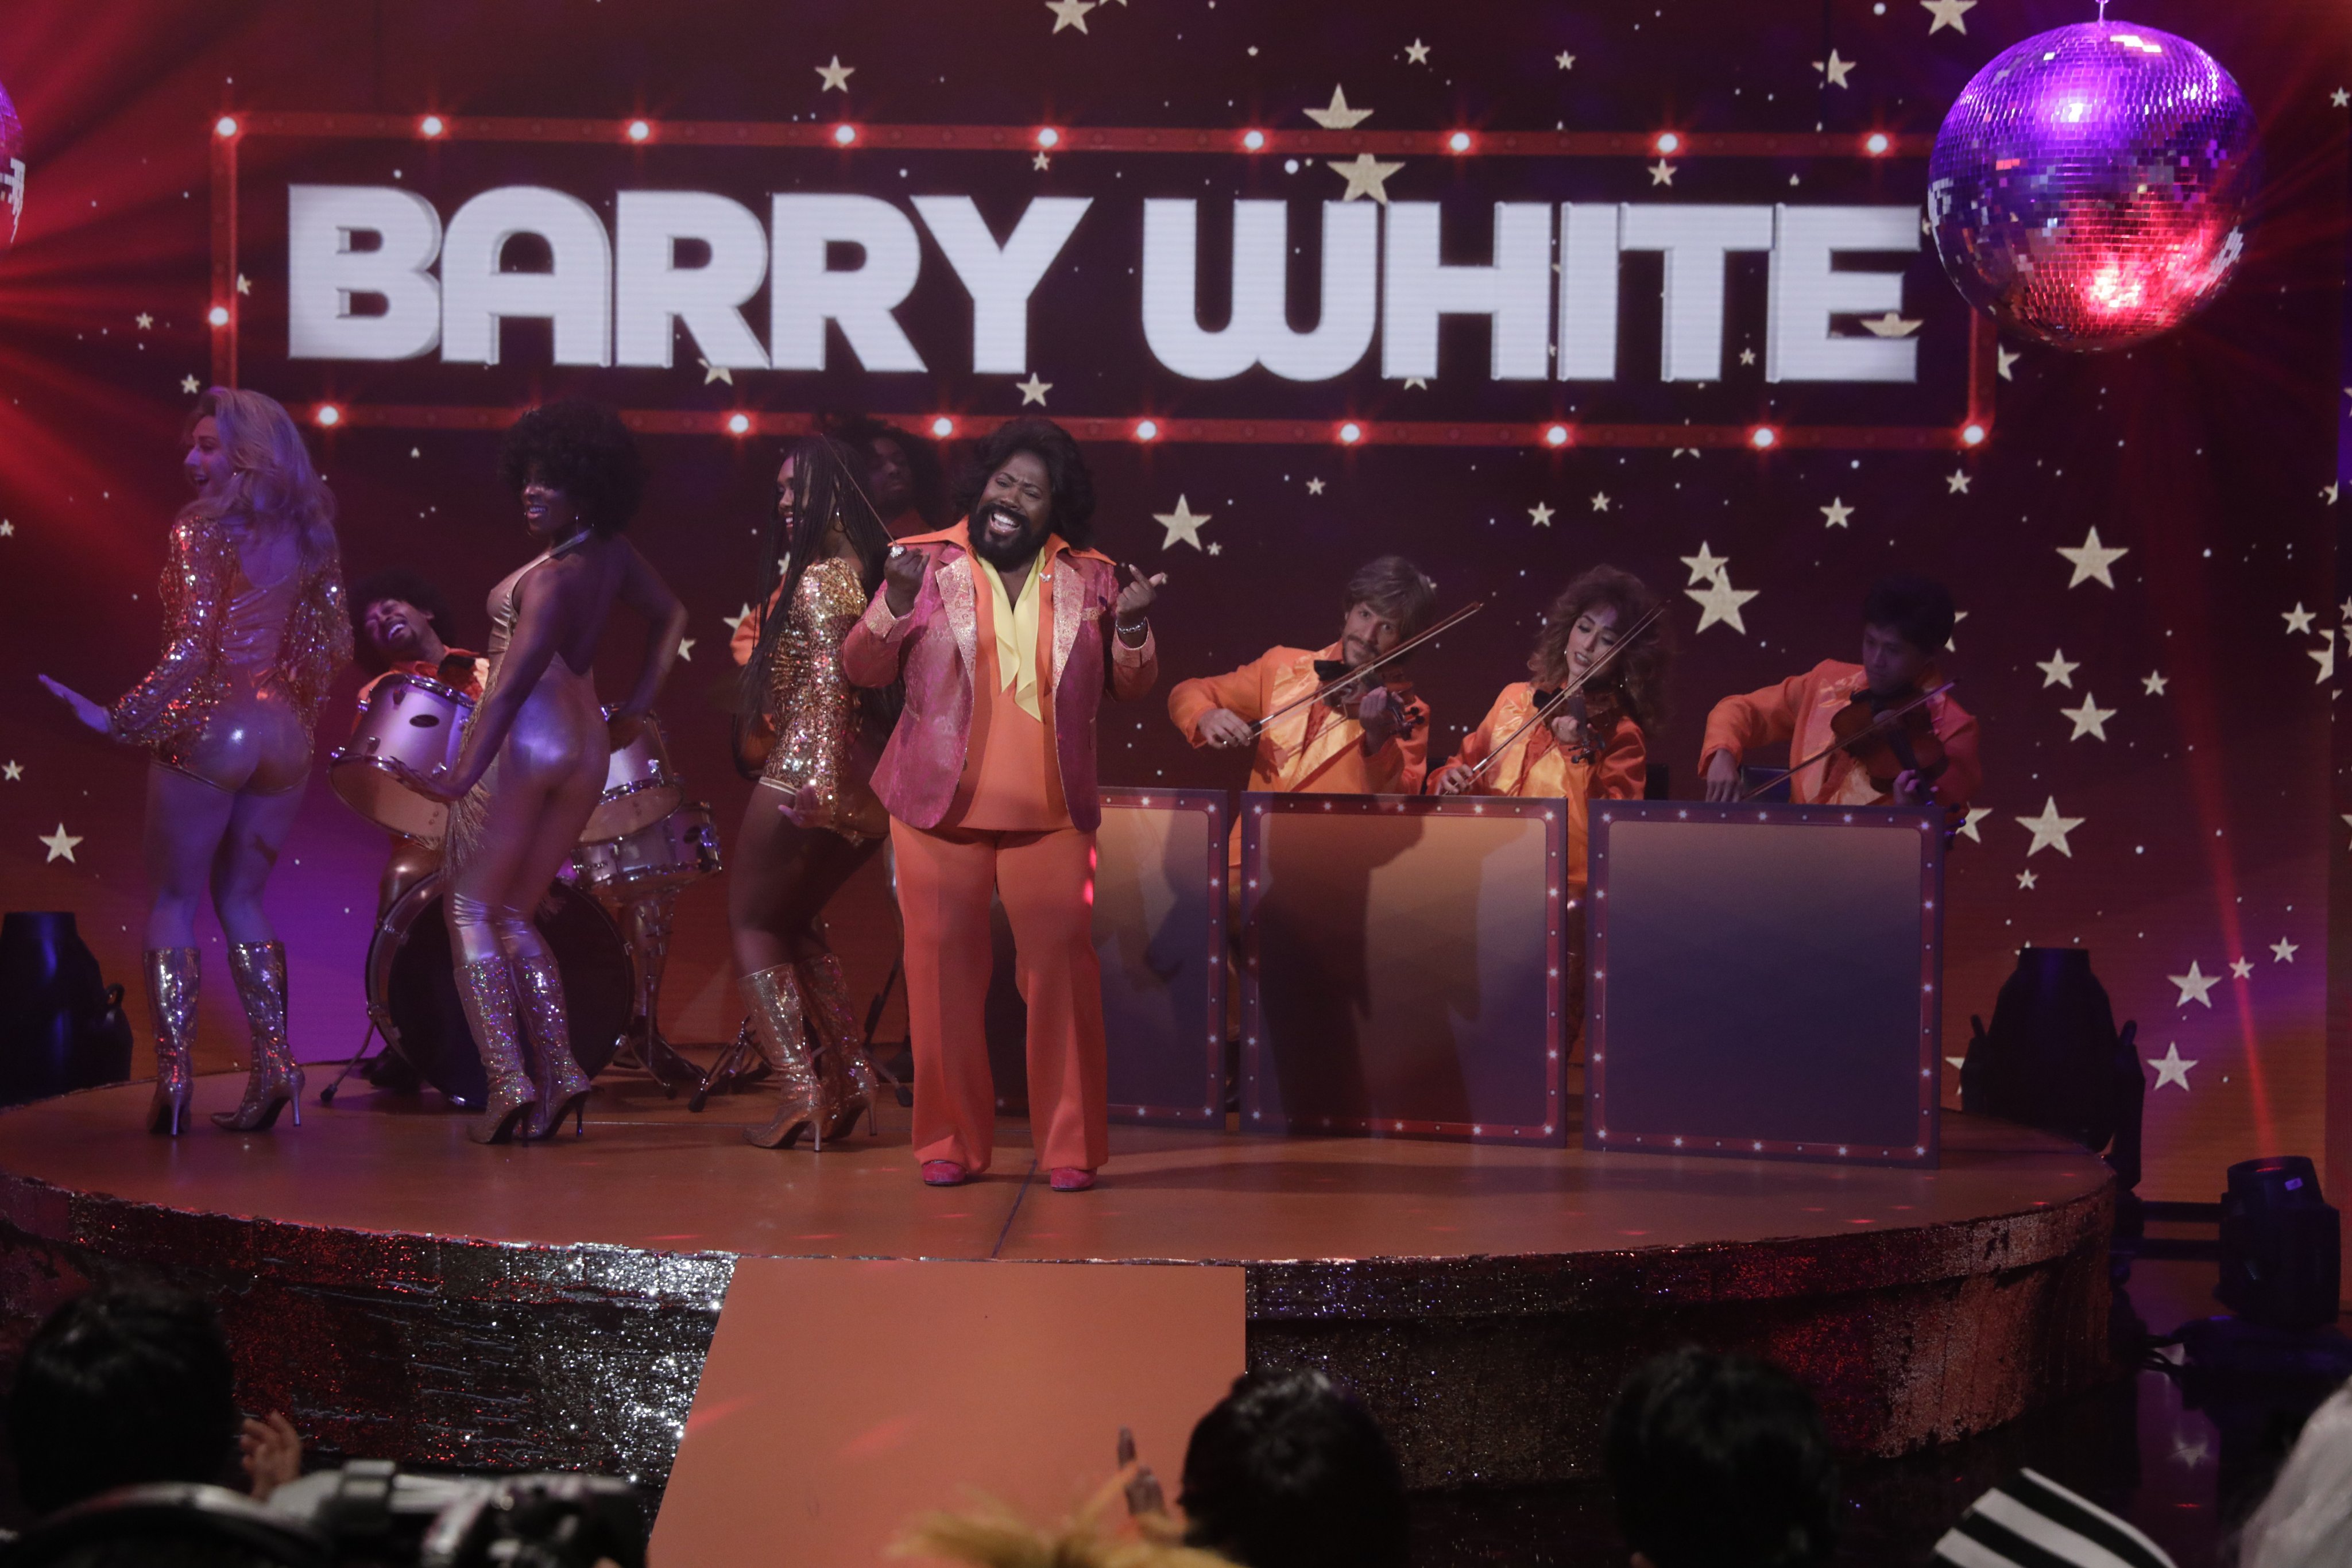 The Talk on Twitter: ".@sherylunderwood unveiled her big transformation  when she hit the stage as the soulful Grammy Award winning artist Barry  White performing "You're The First, The Last, My Everything" for